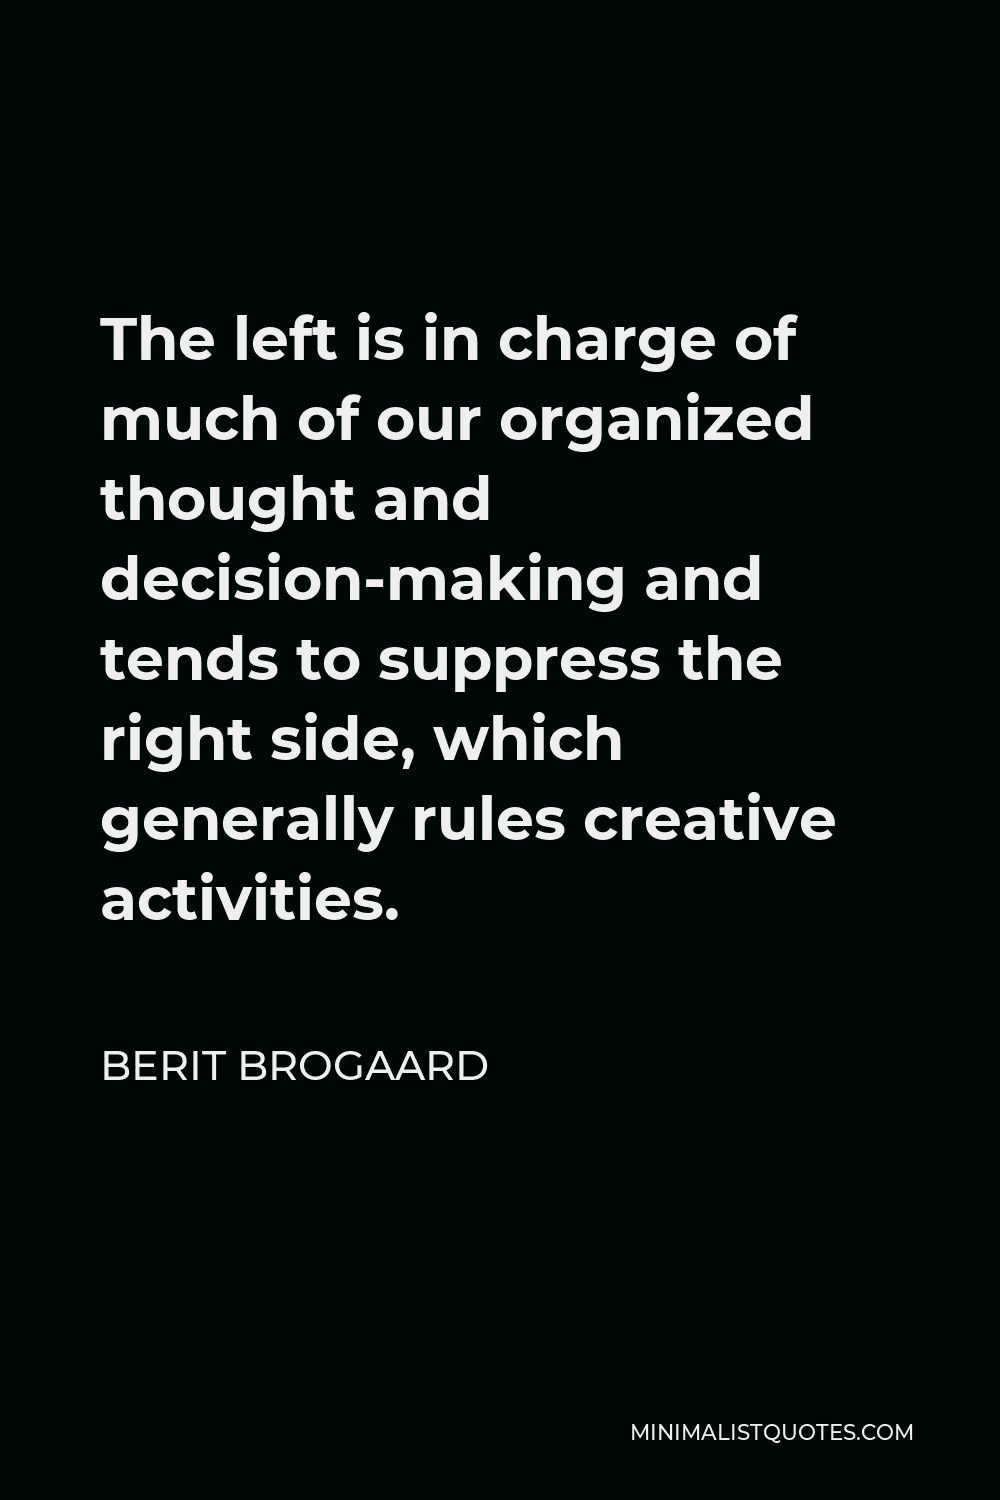 Berit Brogaard Quote - The left is in charge of much of our organized thought and decision-making and tends to suppress the right side, which generally rules creative activities.